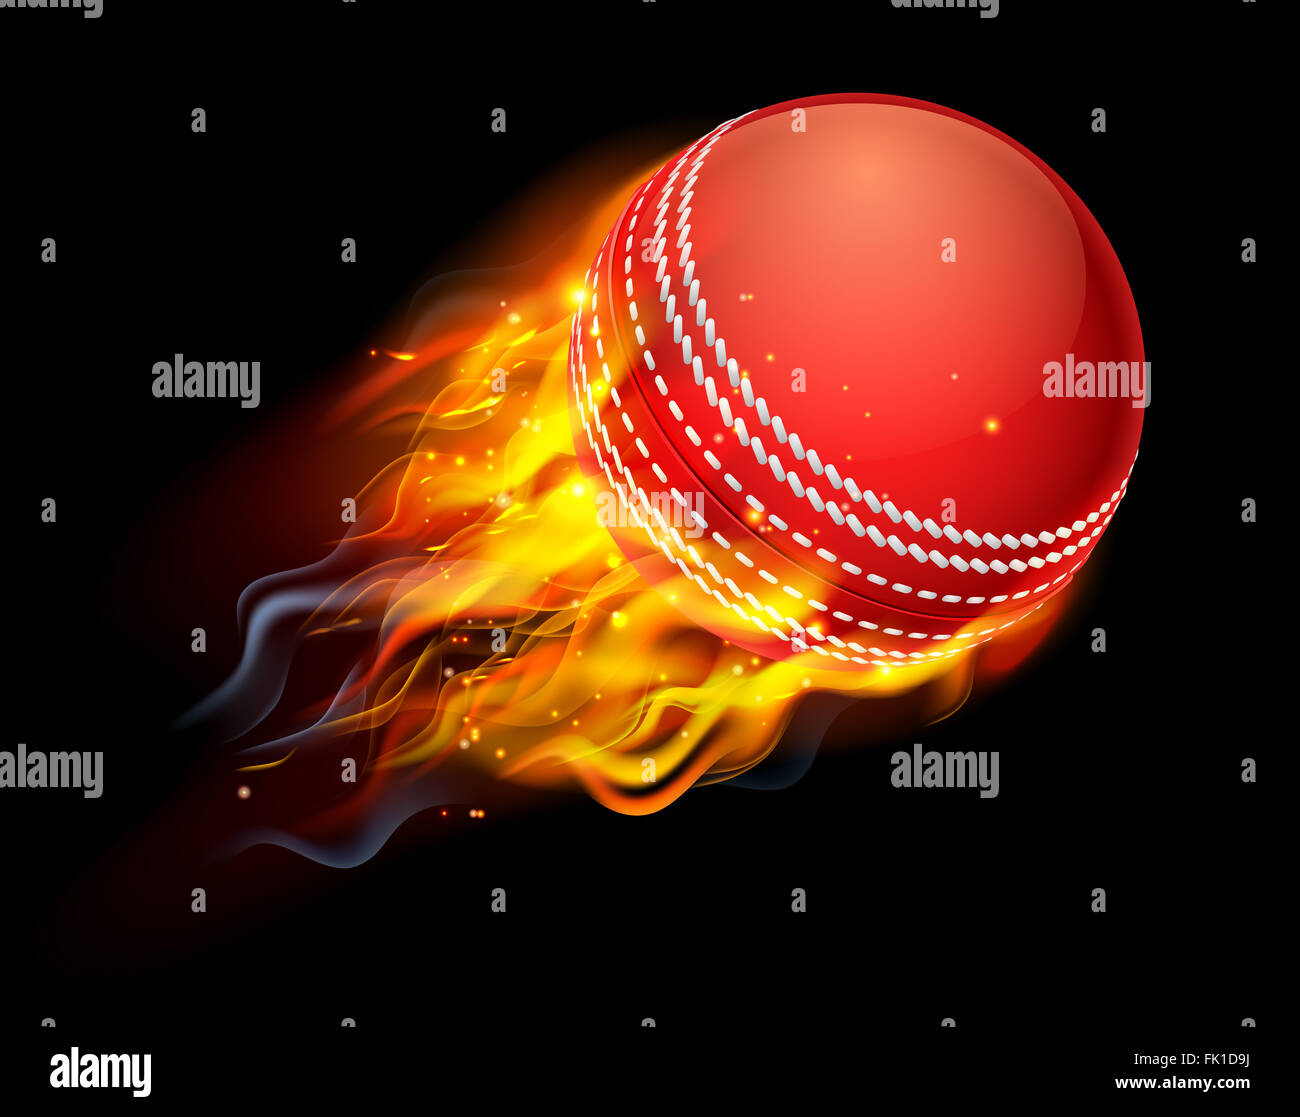 A flaming cricket ball on fire flying through the air Stock Photo